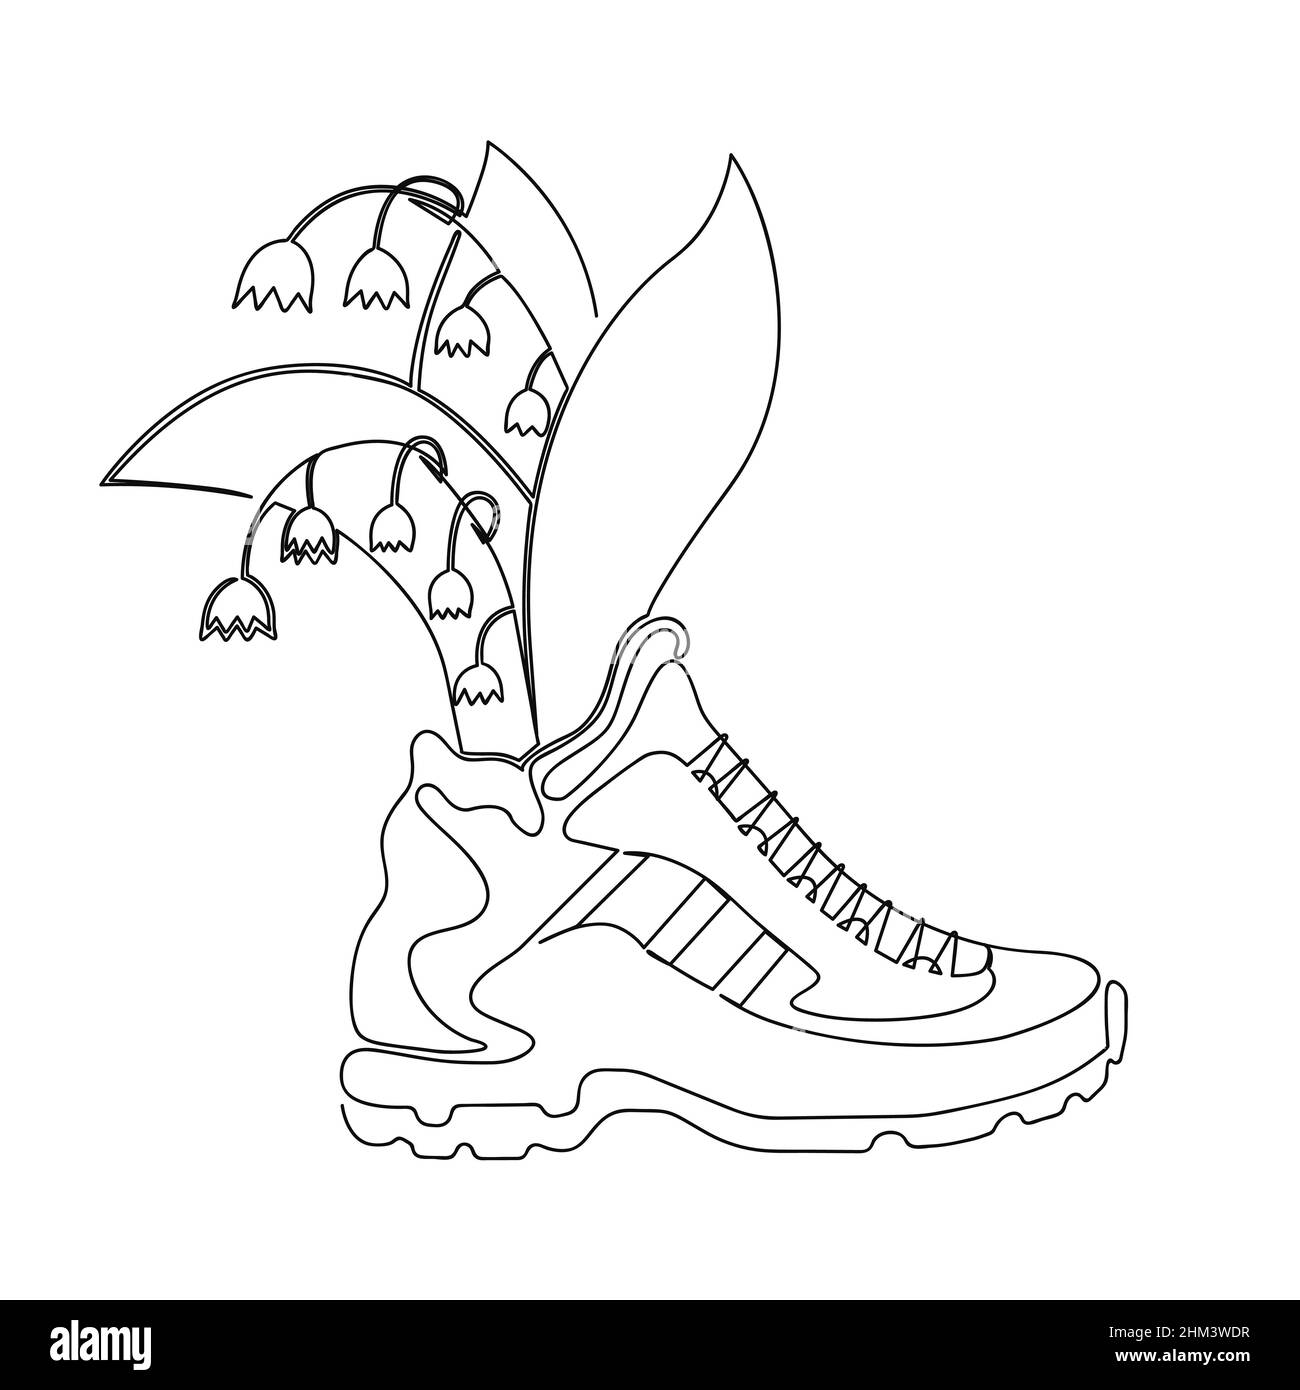 Flowers grow from running shoes. Drawn with one continuous line. Stock vector illustration Stock Vector